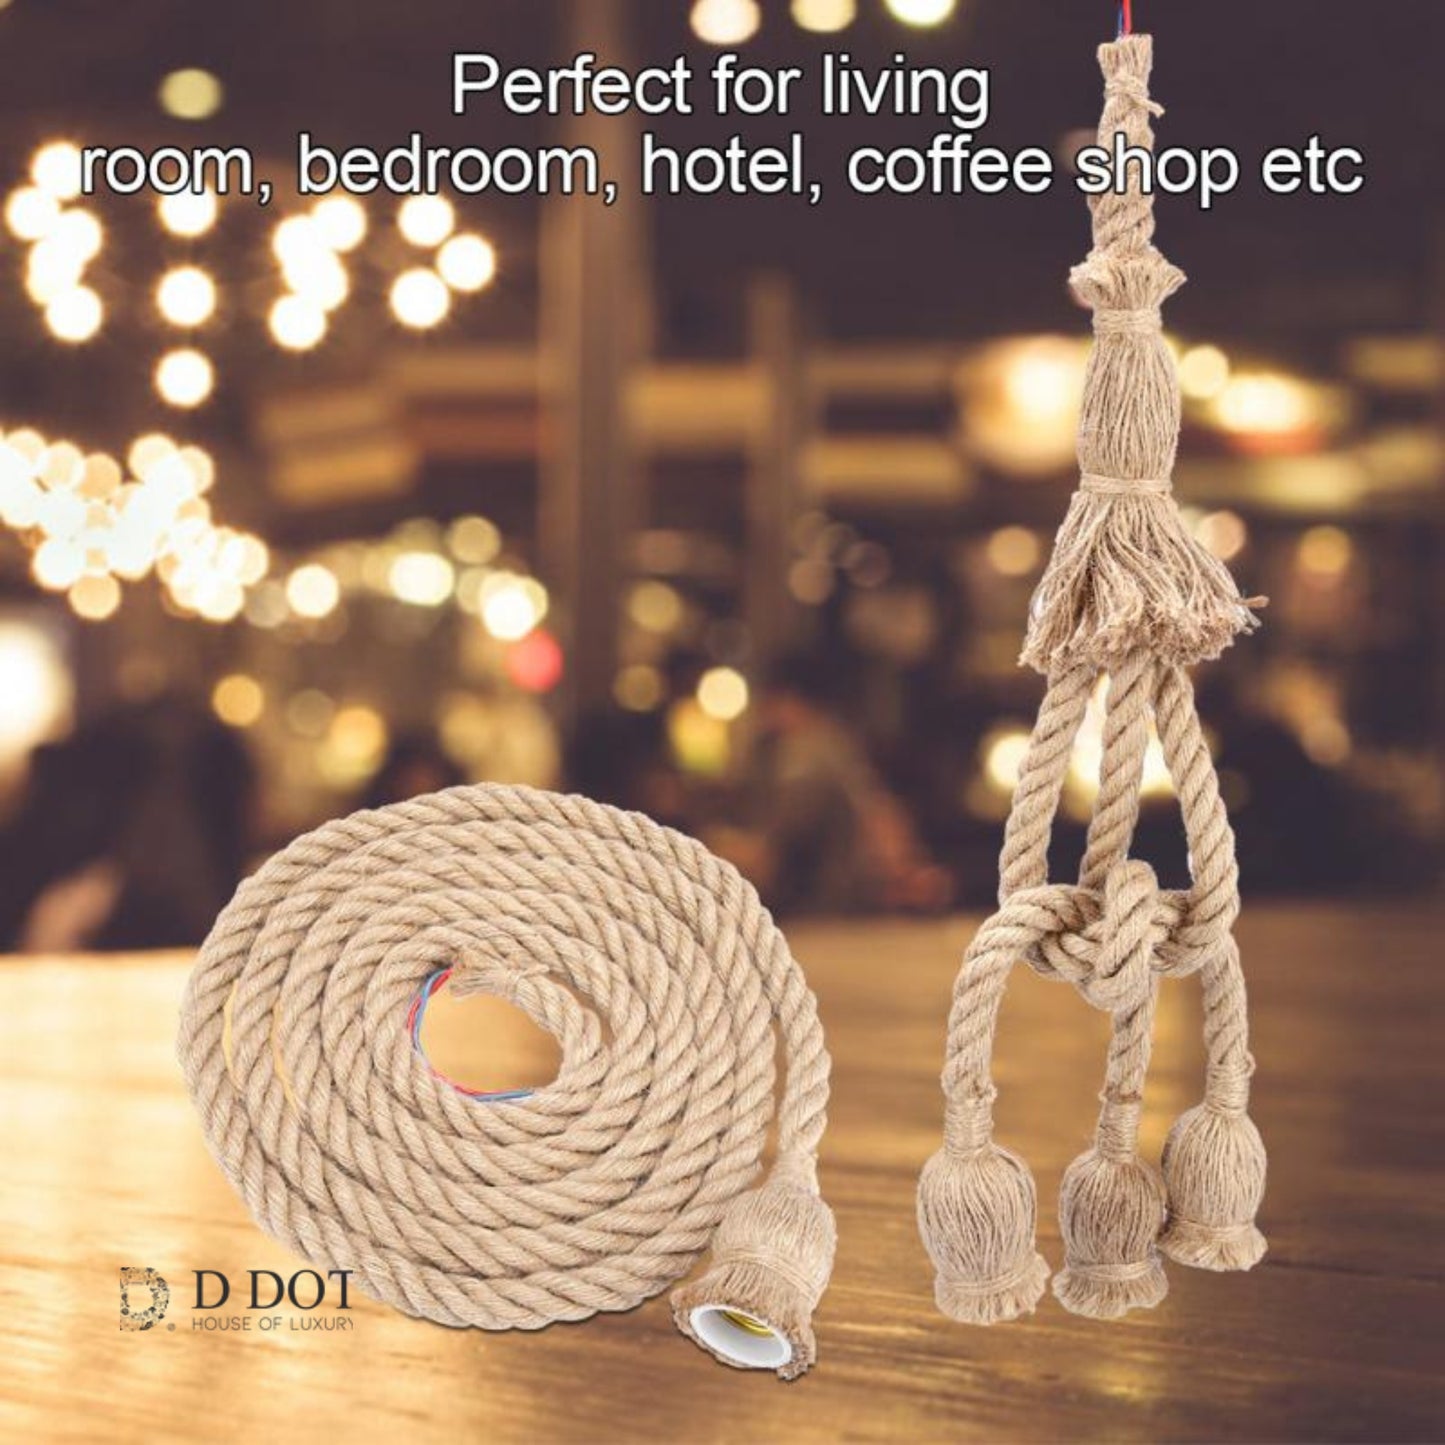 "Rope Electric Wire Lamp Holder Cord - Vintage Style Pendant Lighting Fixture"